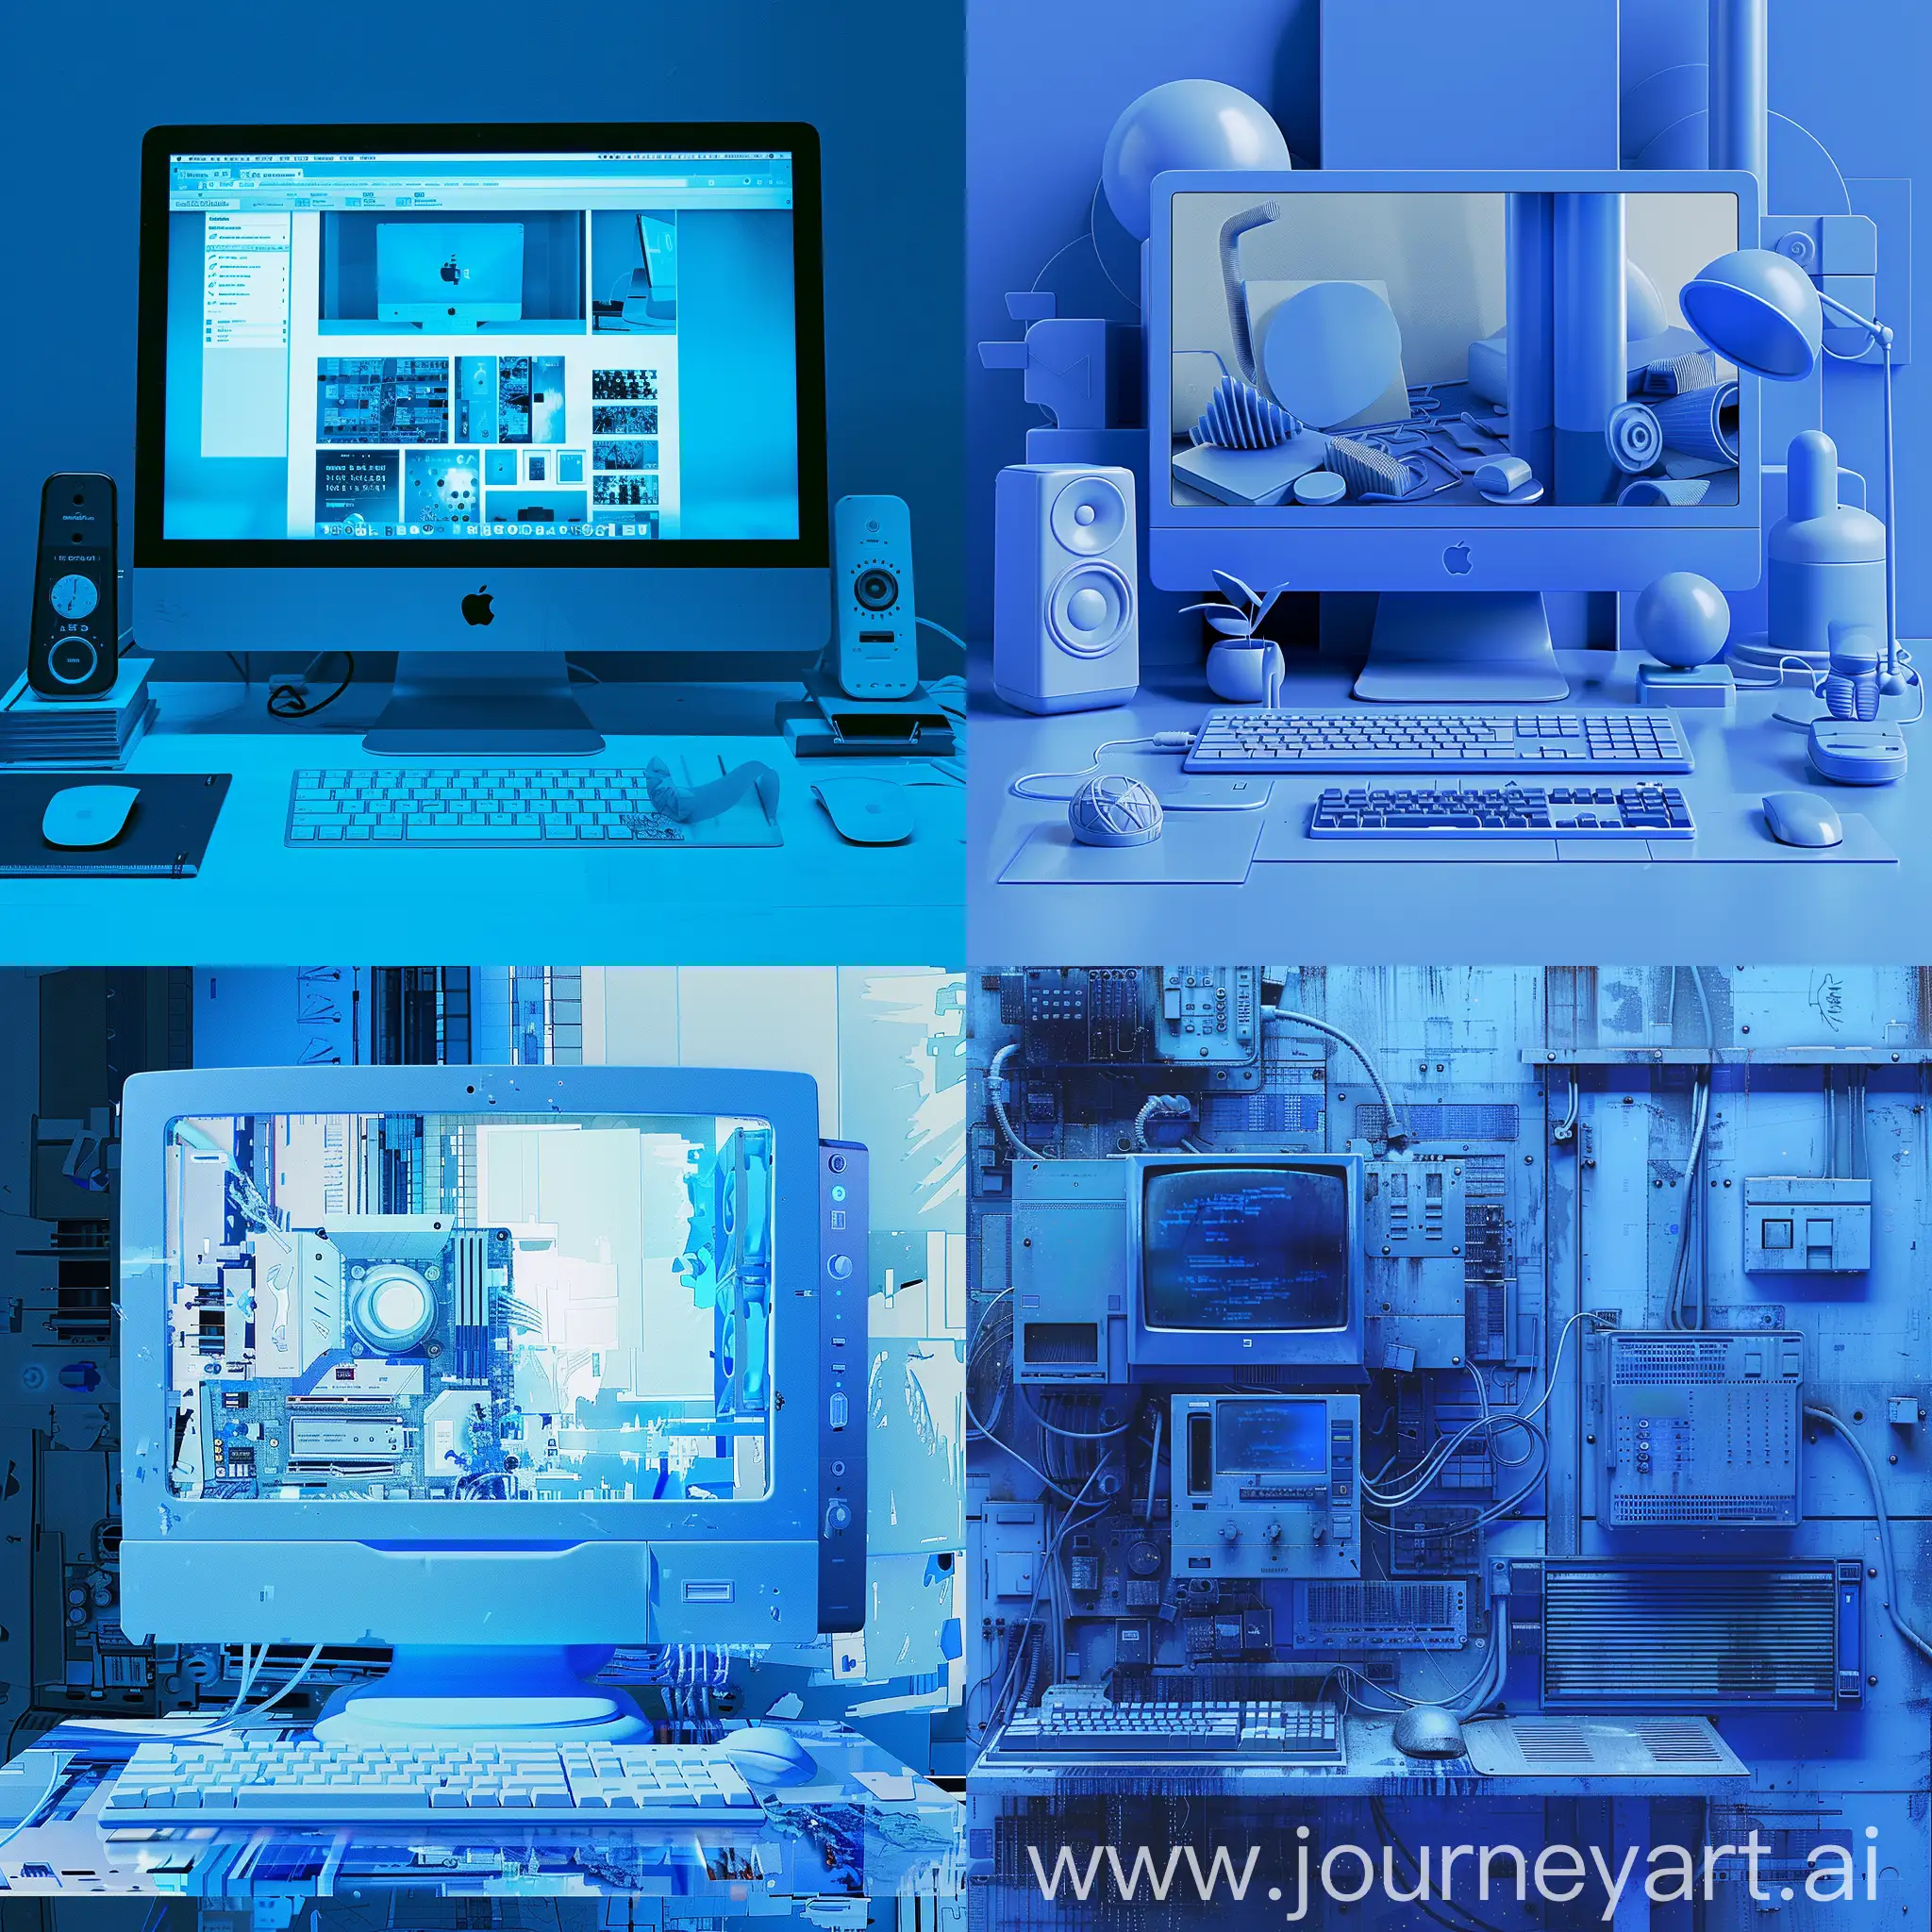 Blue-Toned-Computer-with-Site-Image-in-Shades-of-Blue